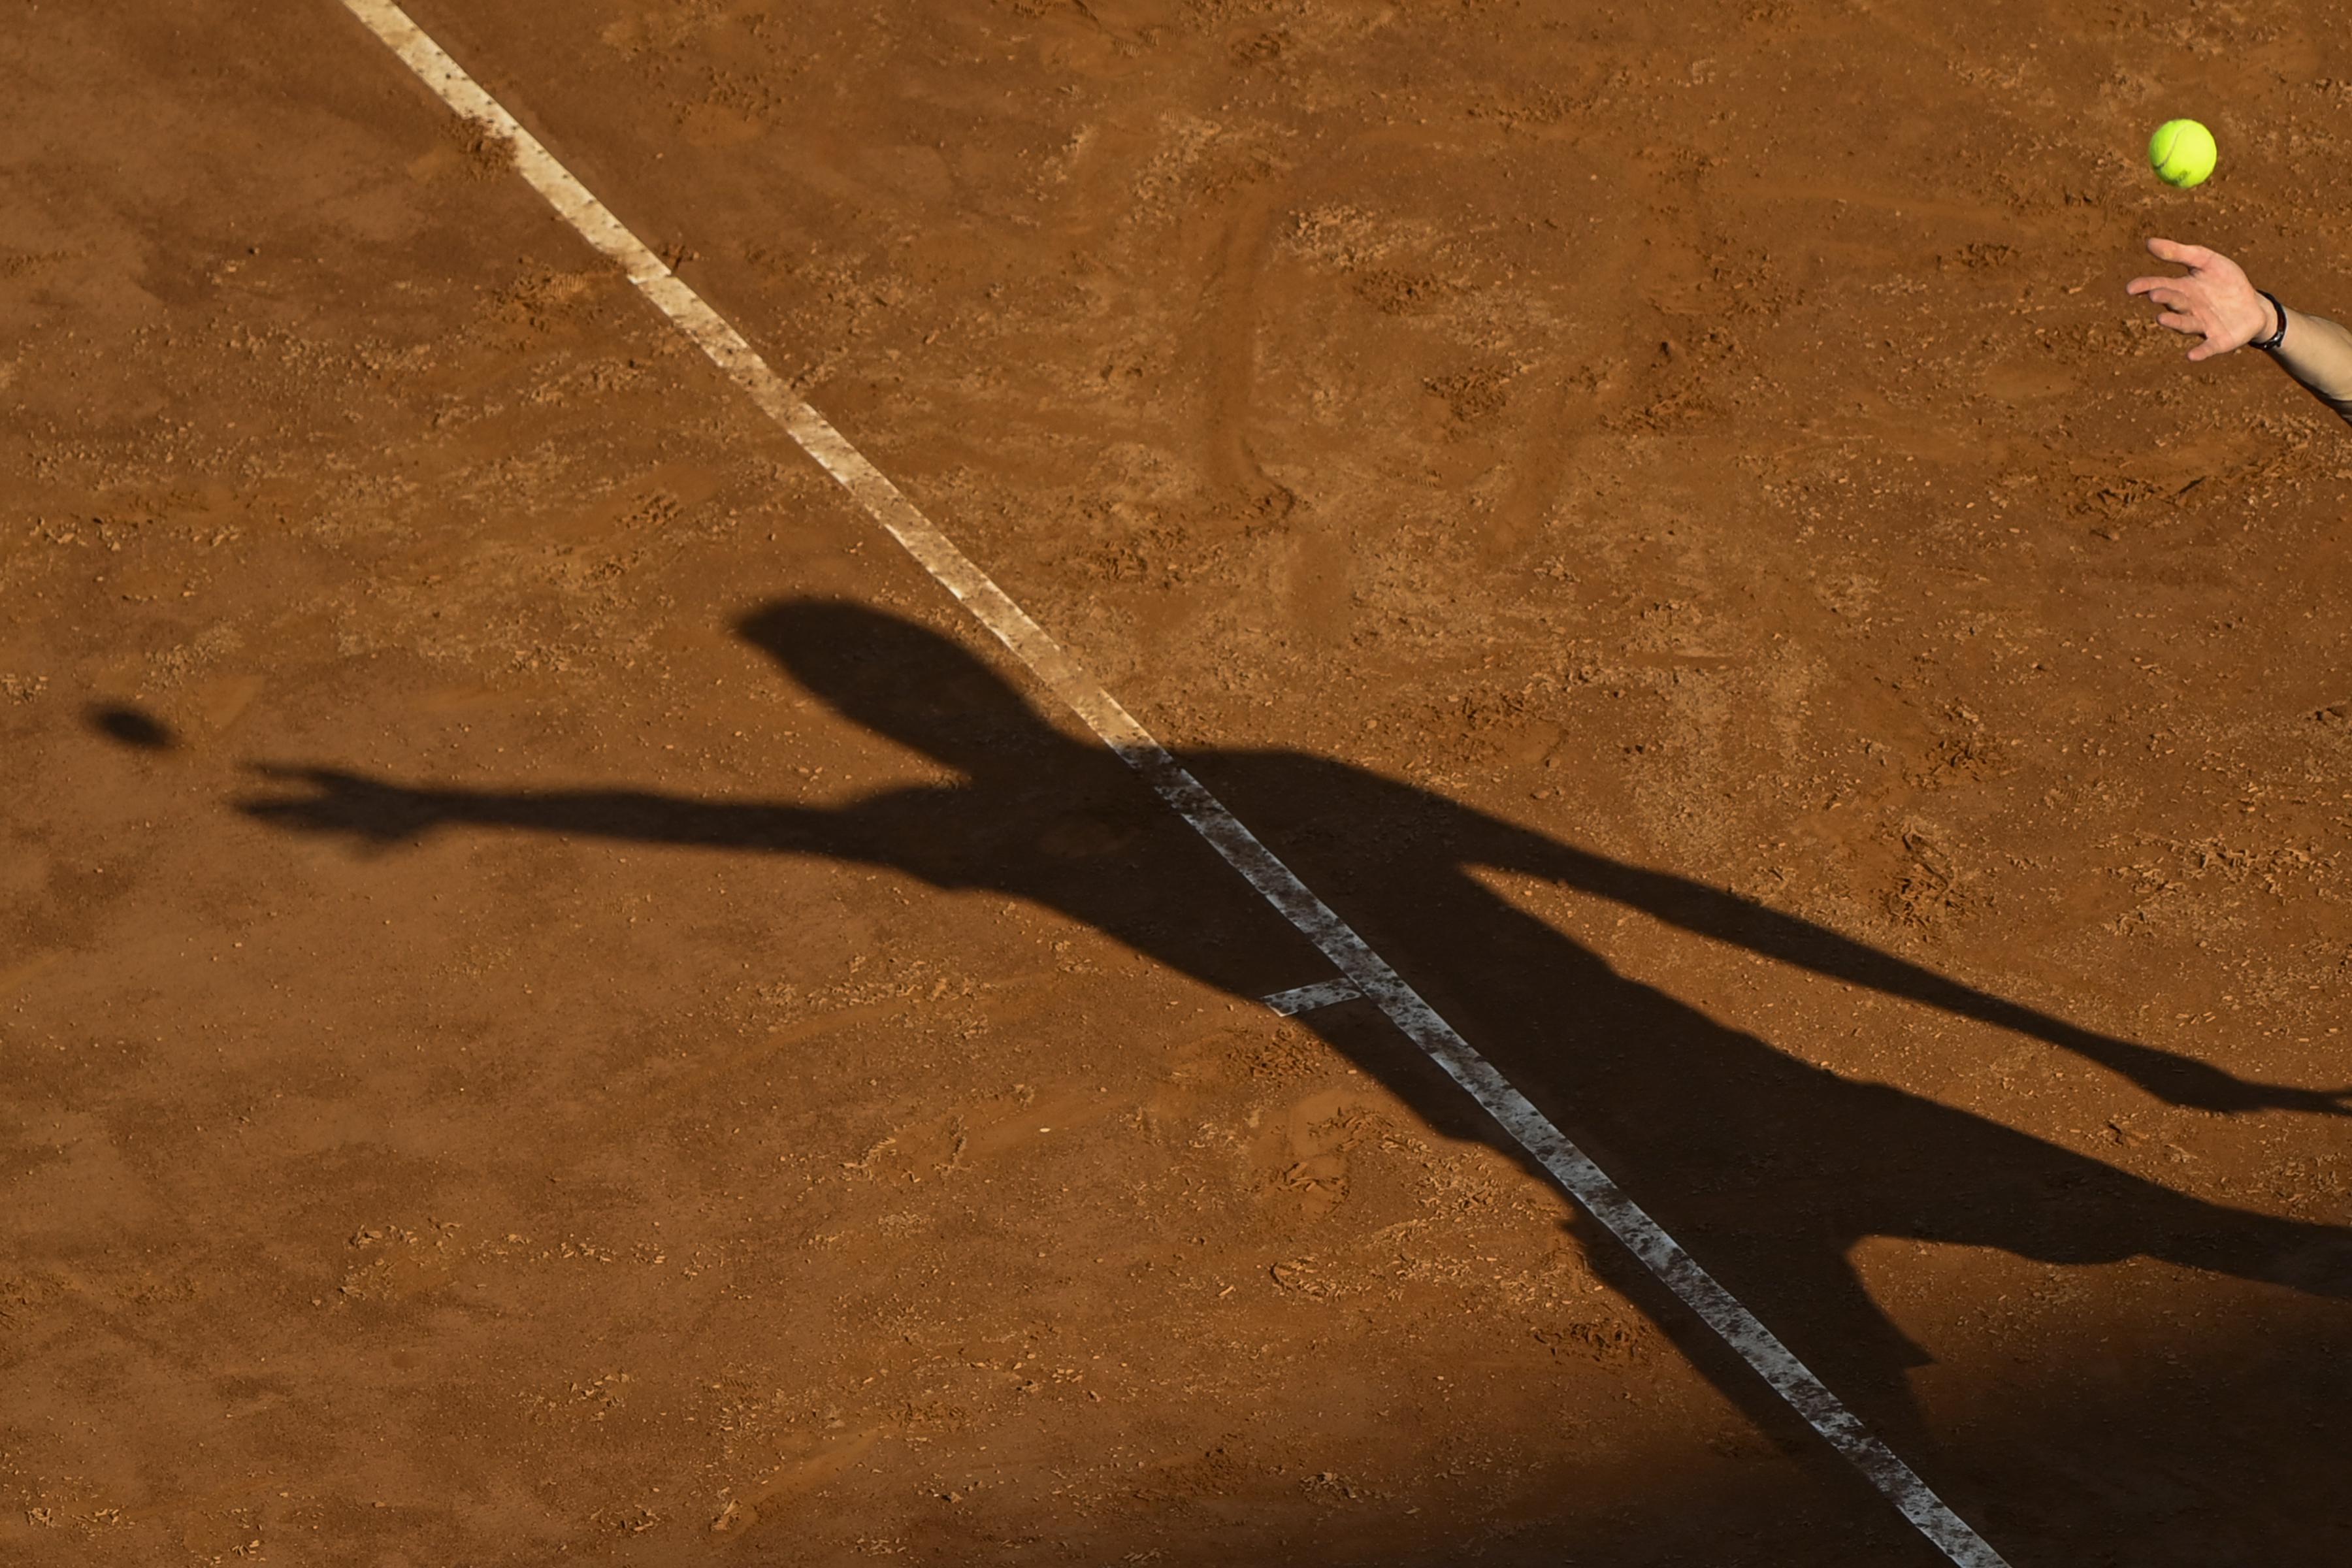 From Roland Garros to Wimbledon, Injuries Increased by Switching from Clay to Grass: The Study